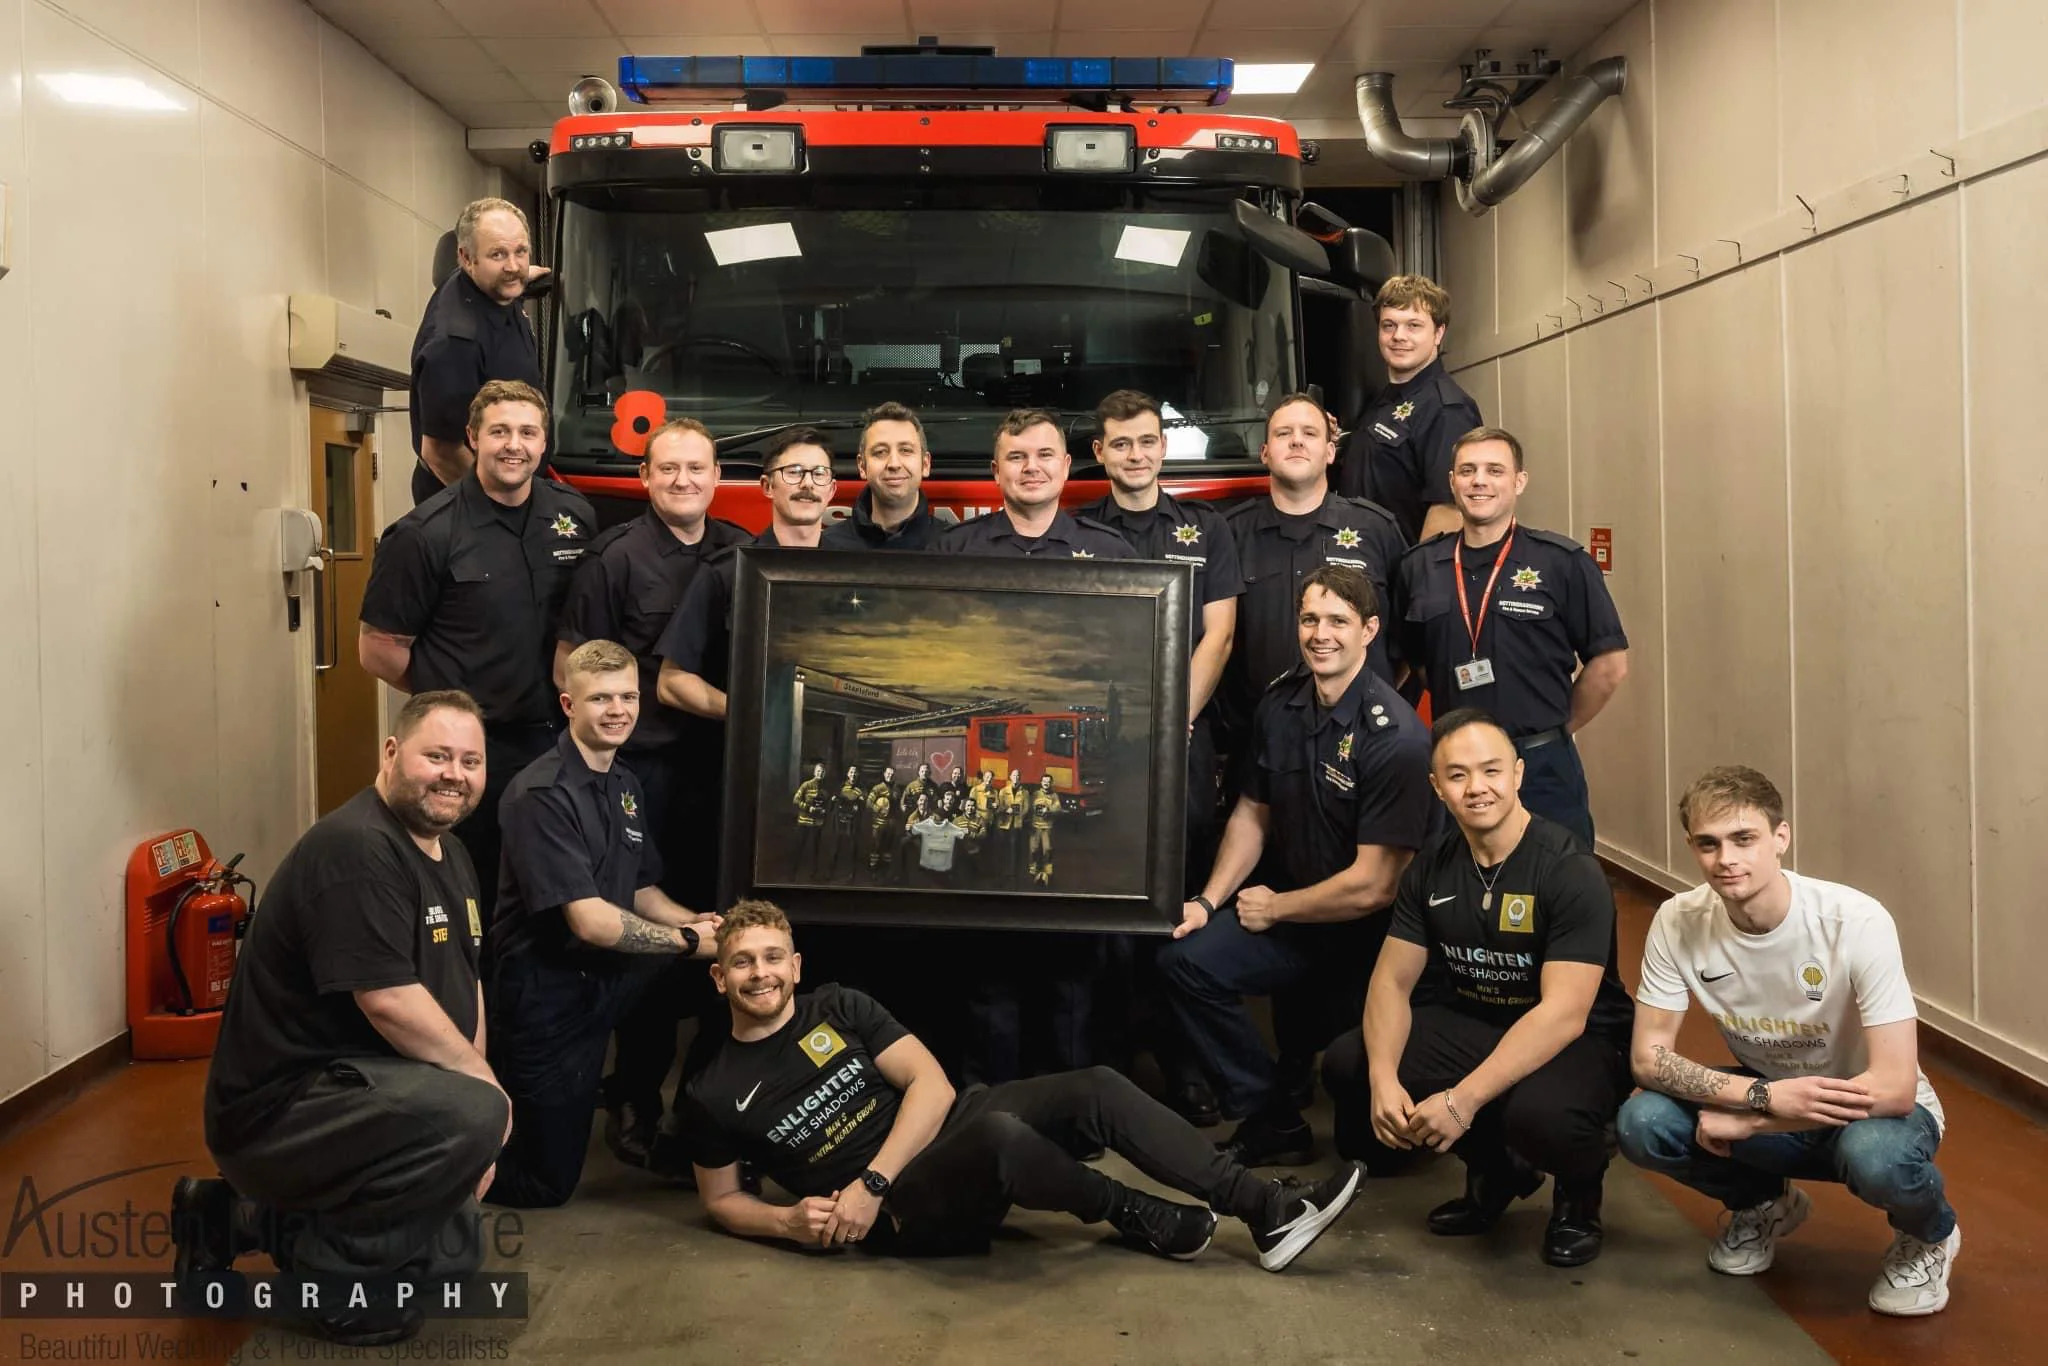 Stapleford crews and Enlighten the Shadows members with the painting by the fire engine.